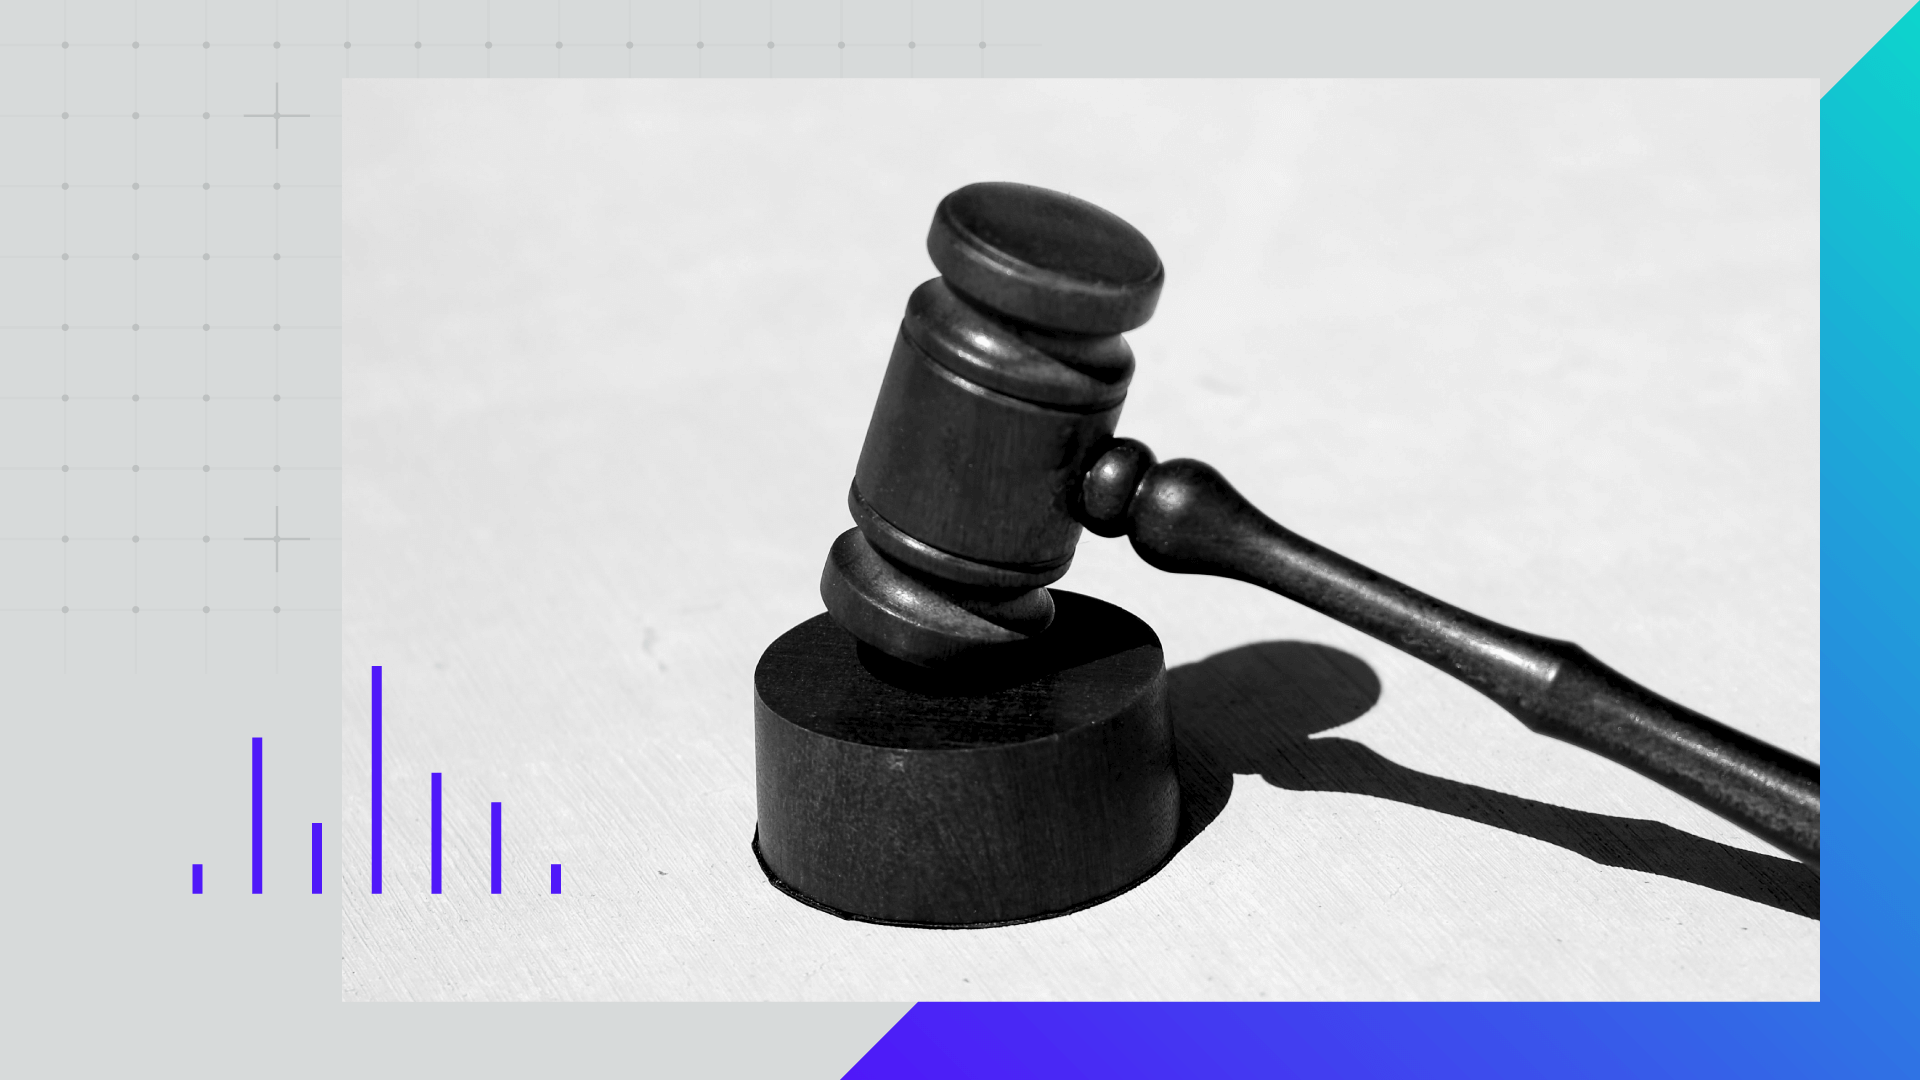 Graphic image of a gavel